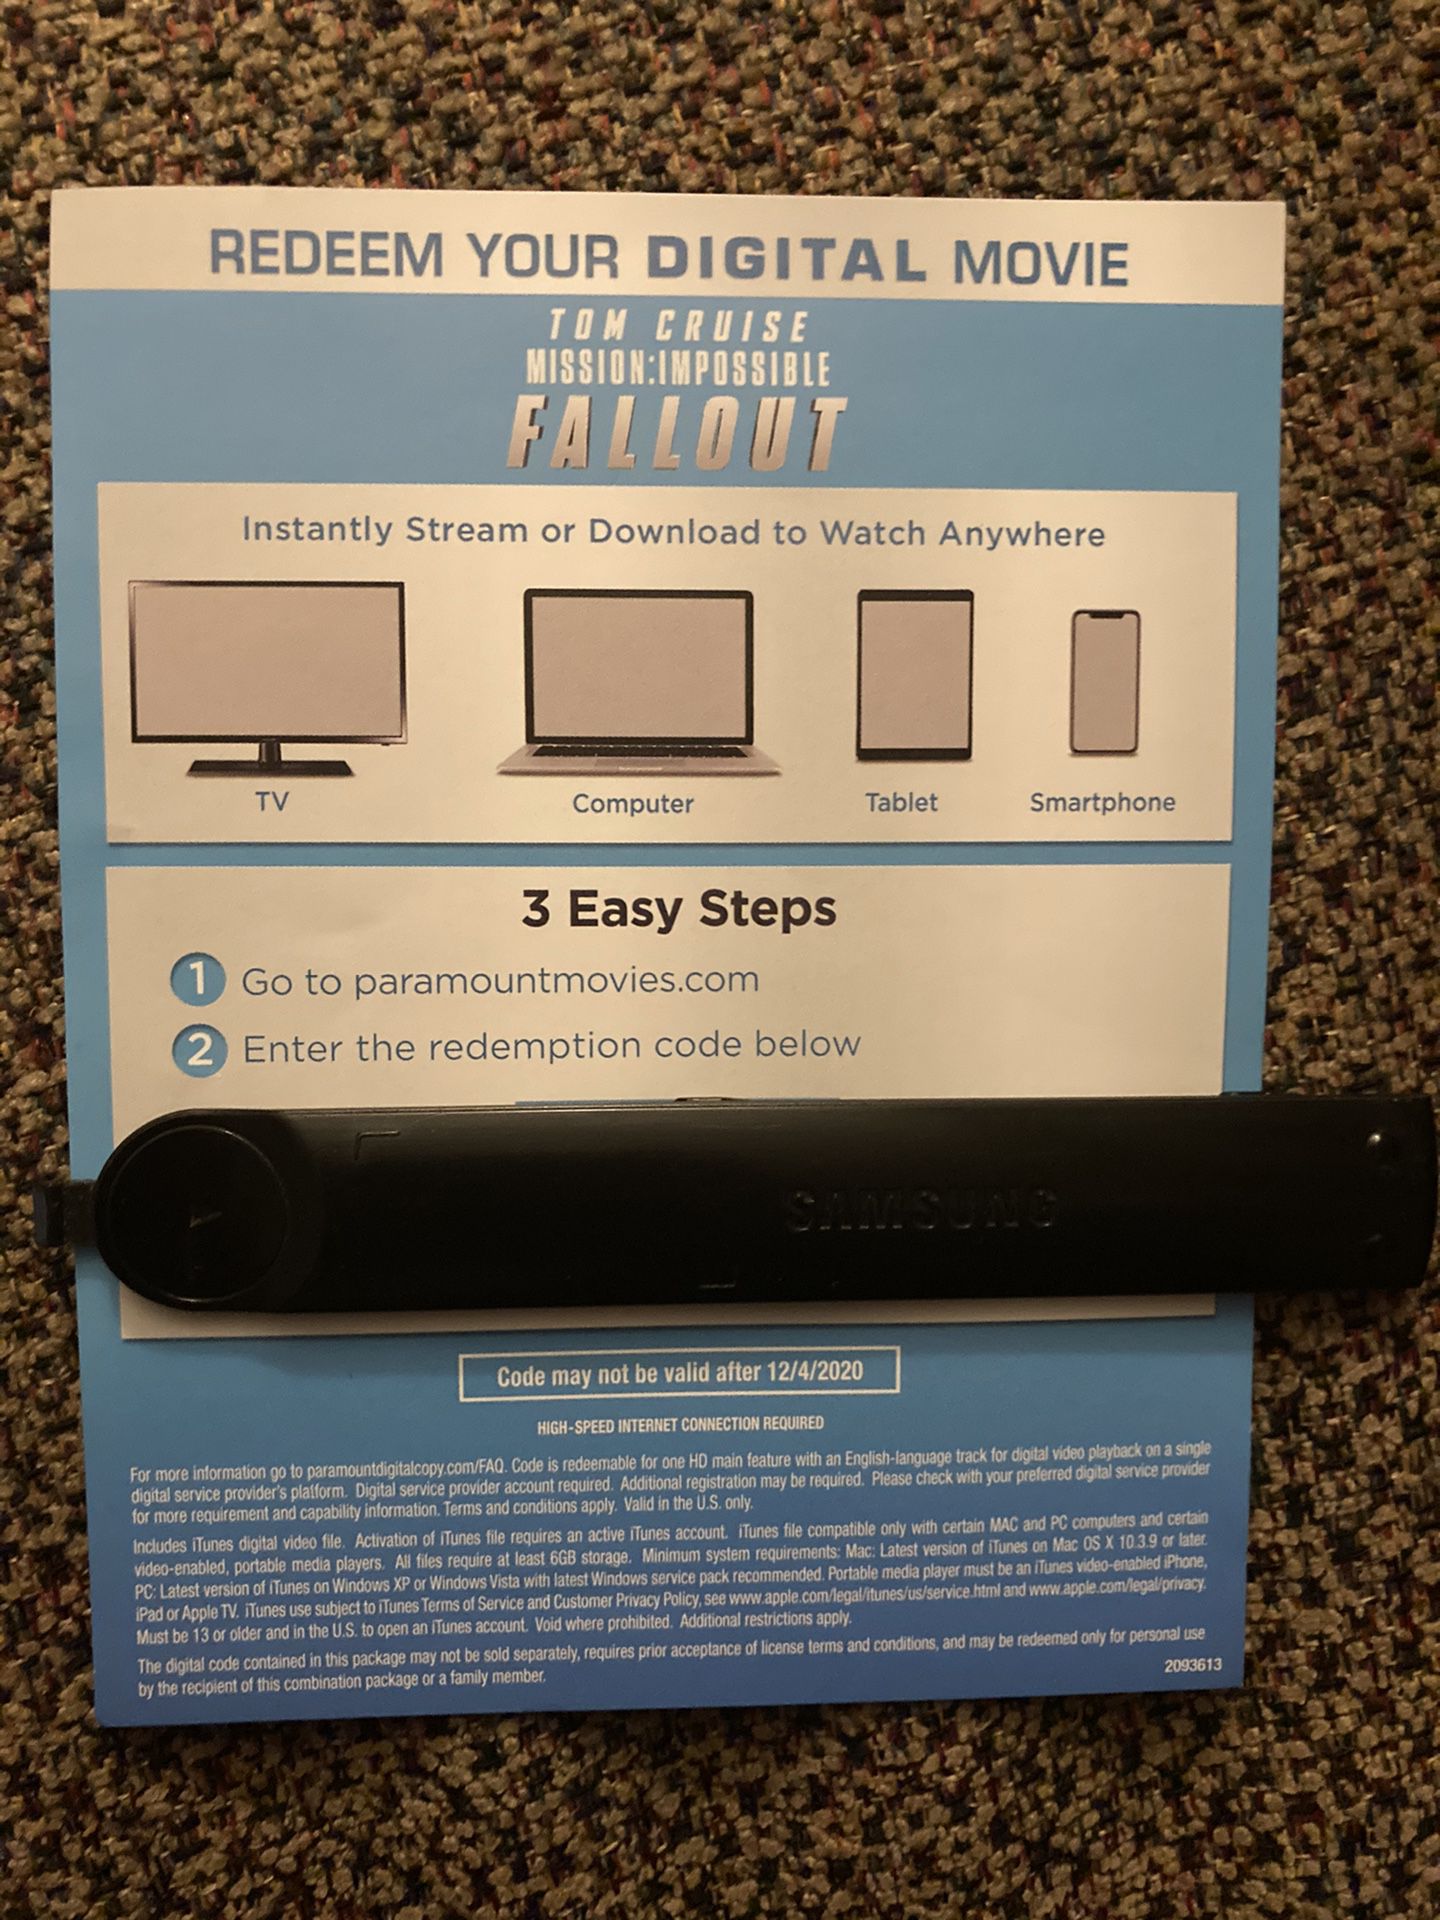 Mission impossible fallout HD digital code